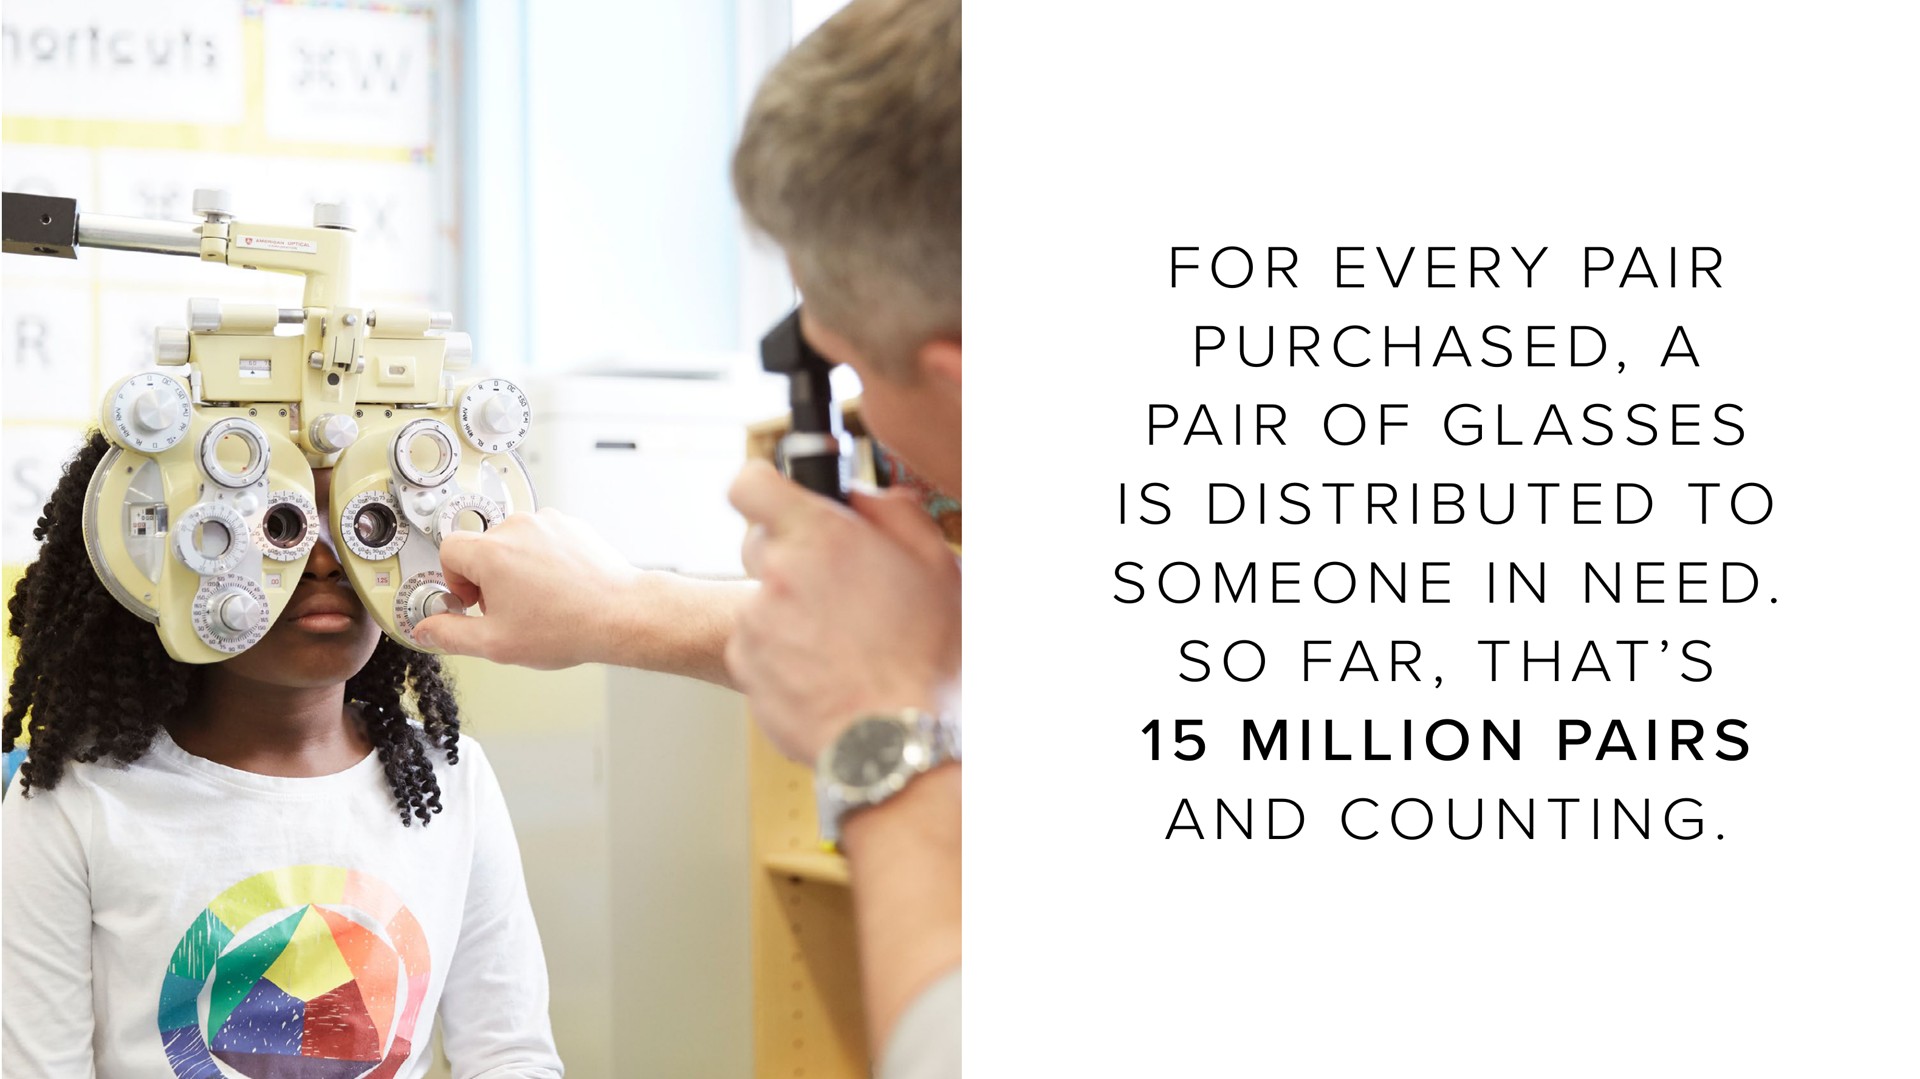 i as a i as i i i to i at i i i a i for every pair purchased pair of glasses is distributed someone in need so far that million pairs and counting | Warby Parker